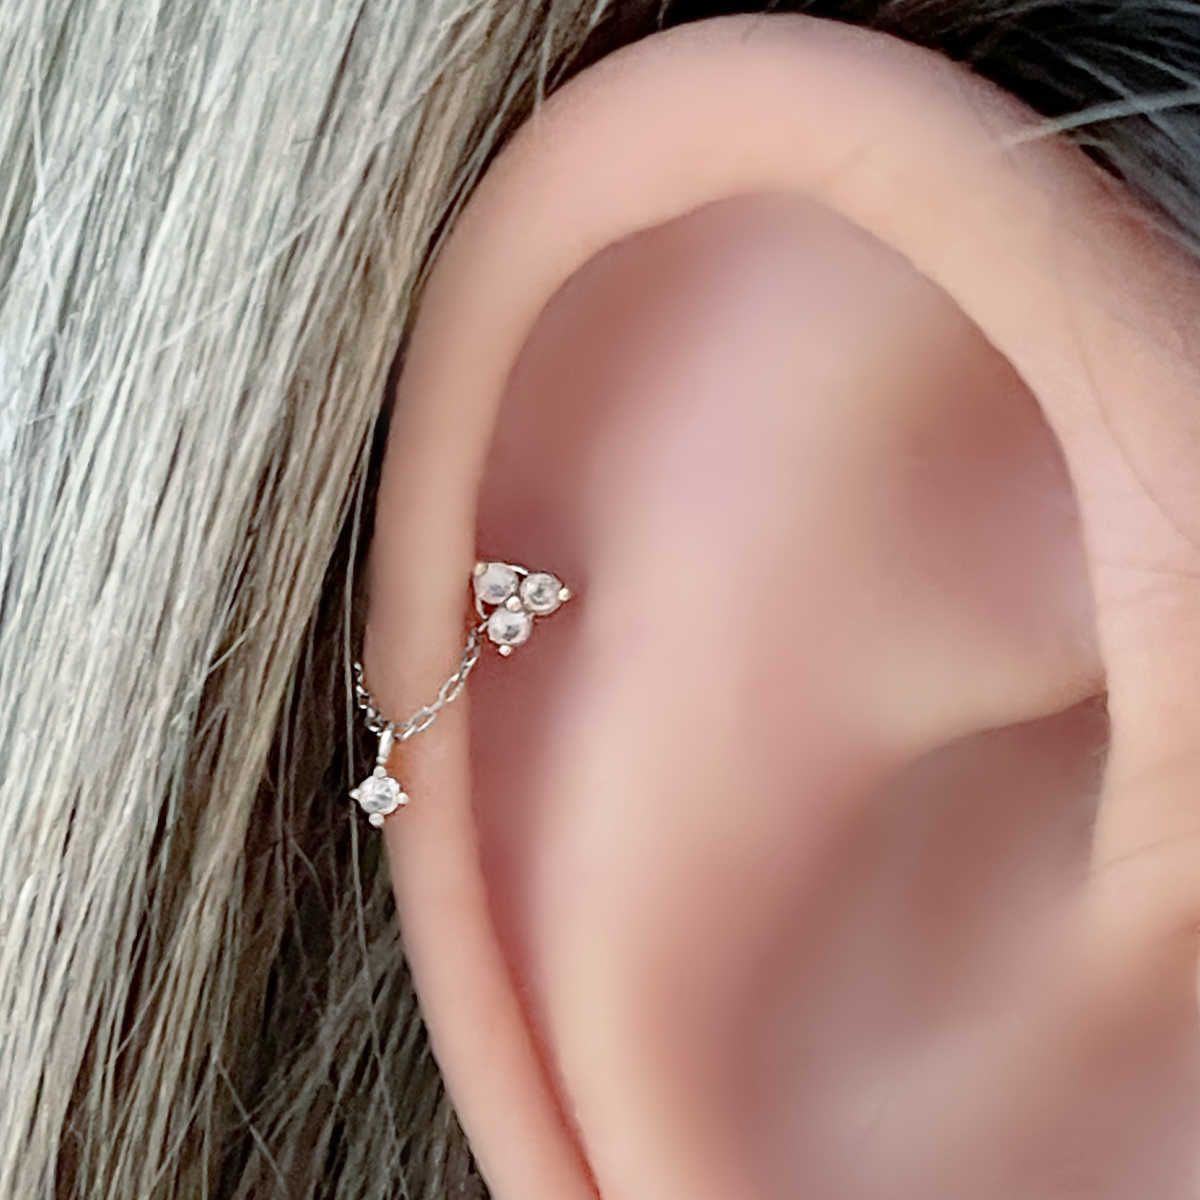 Diamond Earring Charm | White Gold Connected Piercing Chain on Helix